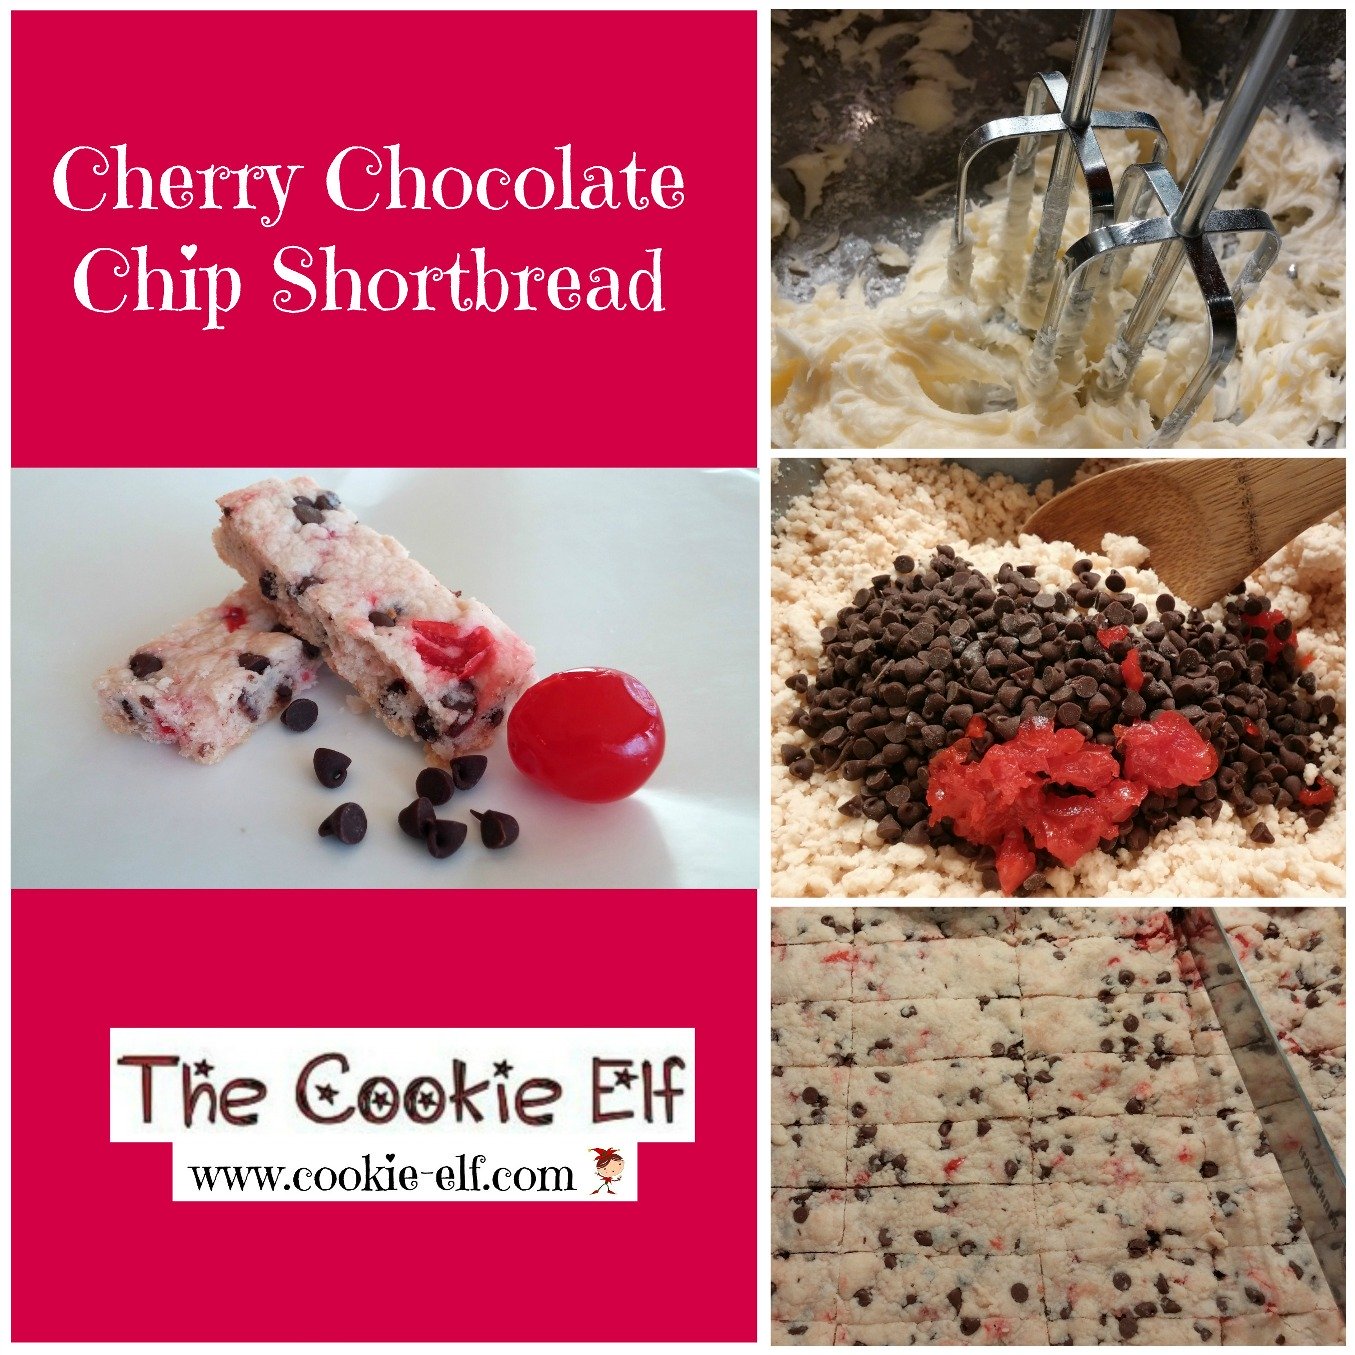 Cherry Chocolate Chip Shortbread from The Cookie Elf